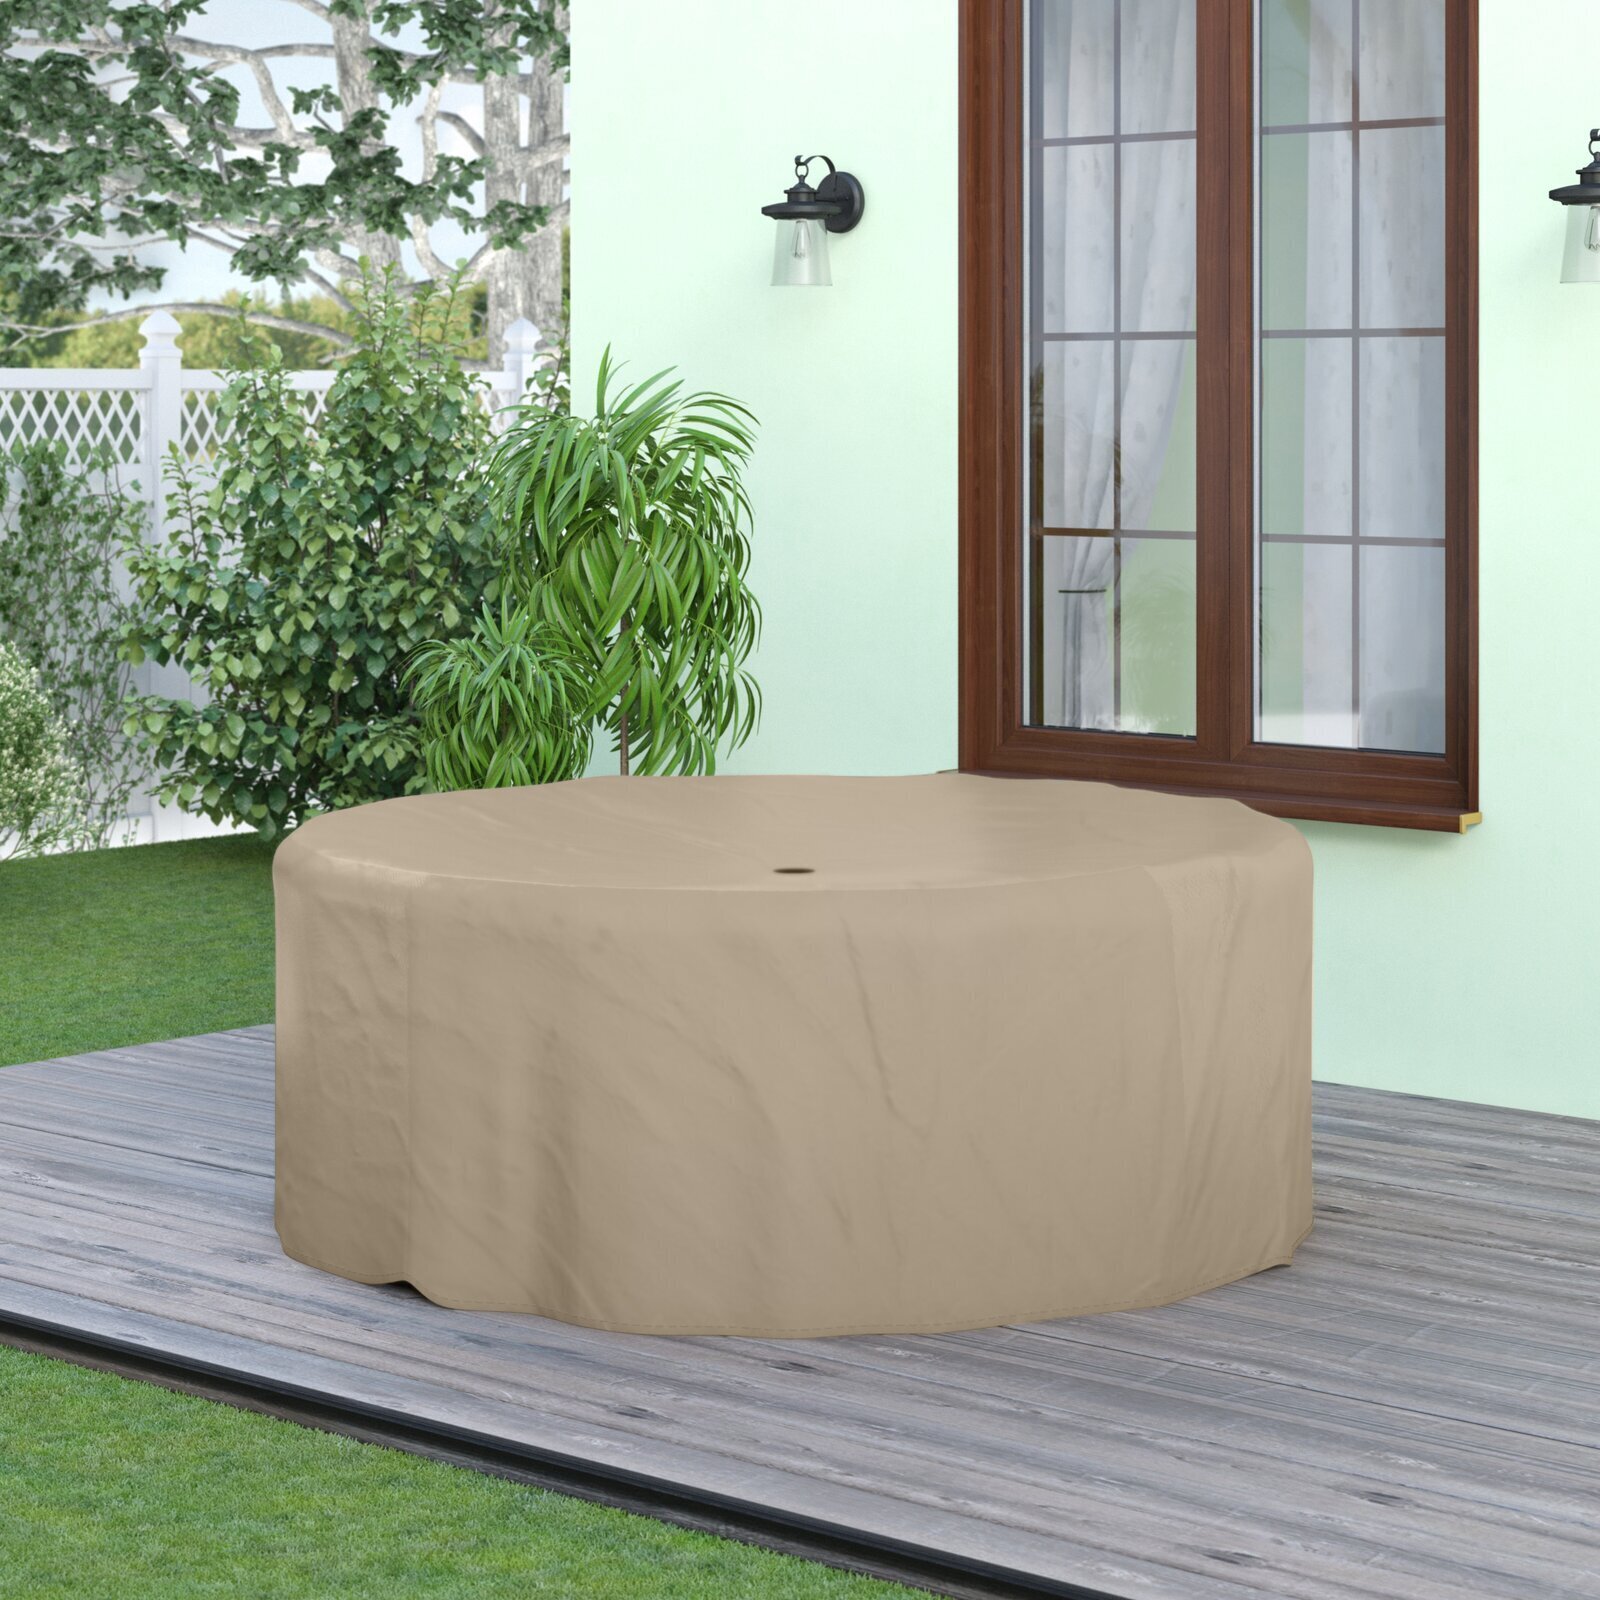 Round Tan Patio Table Cover With Umbrella Hole